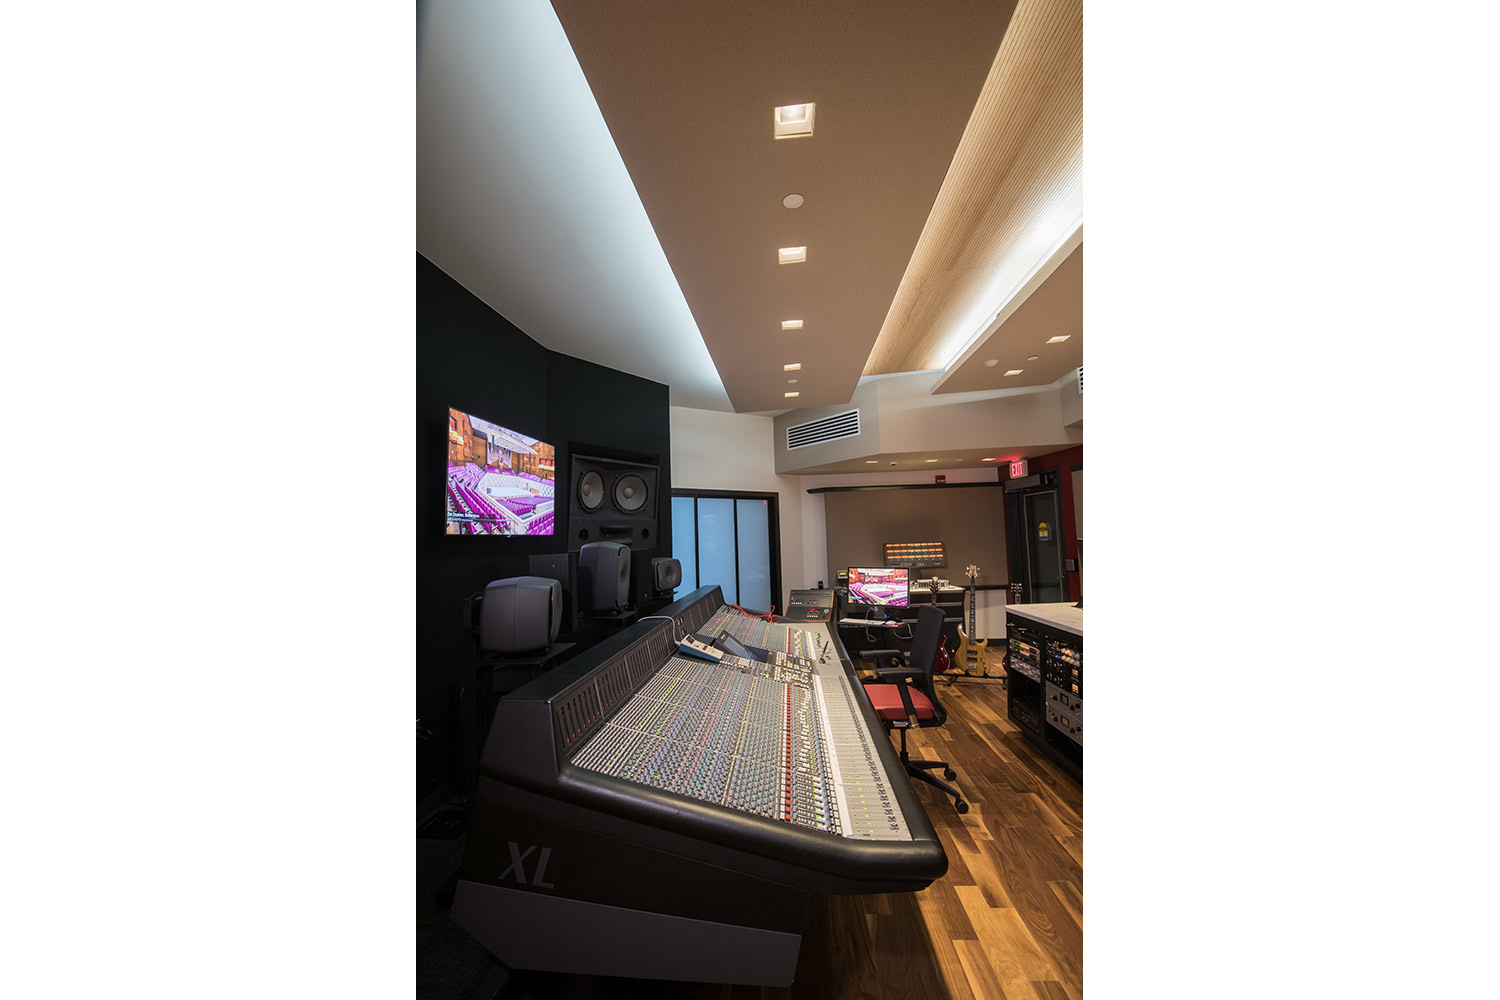 Montgomery County Community College in Blue Bell, PA brand-new Recording Studio for their Digital Music Technology course. Designed by WSDG. Architectural acoustics and media systems engineering. Control Room vertical view 2